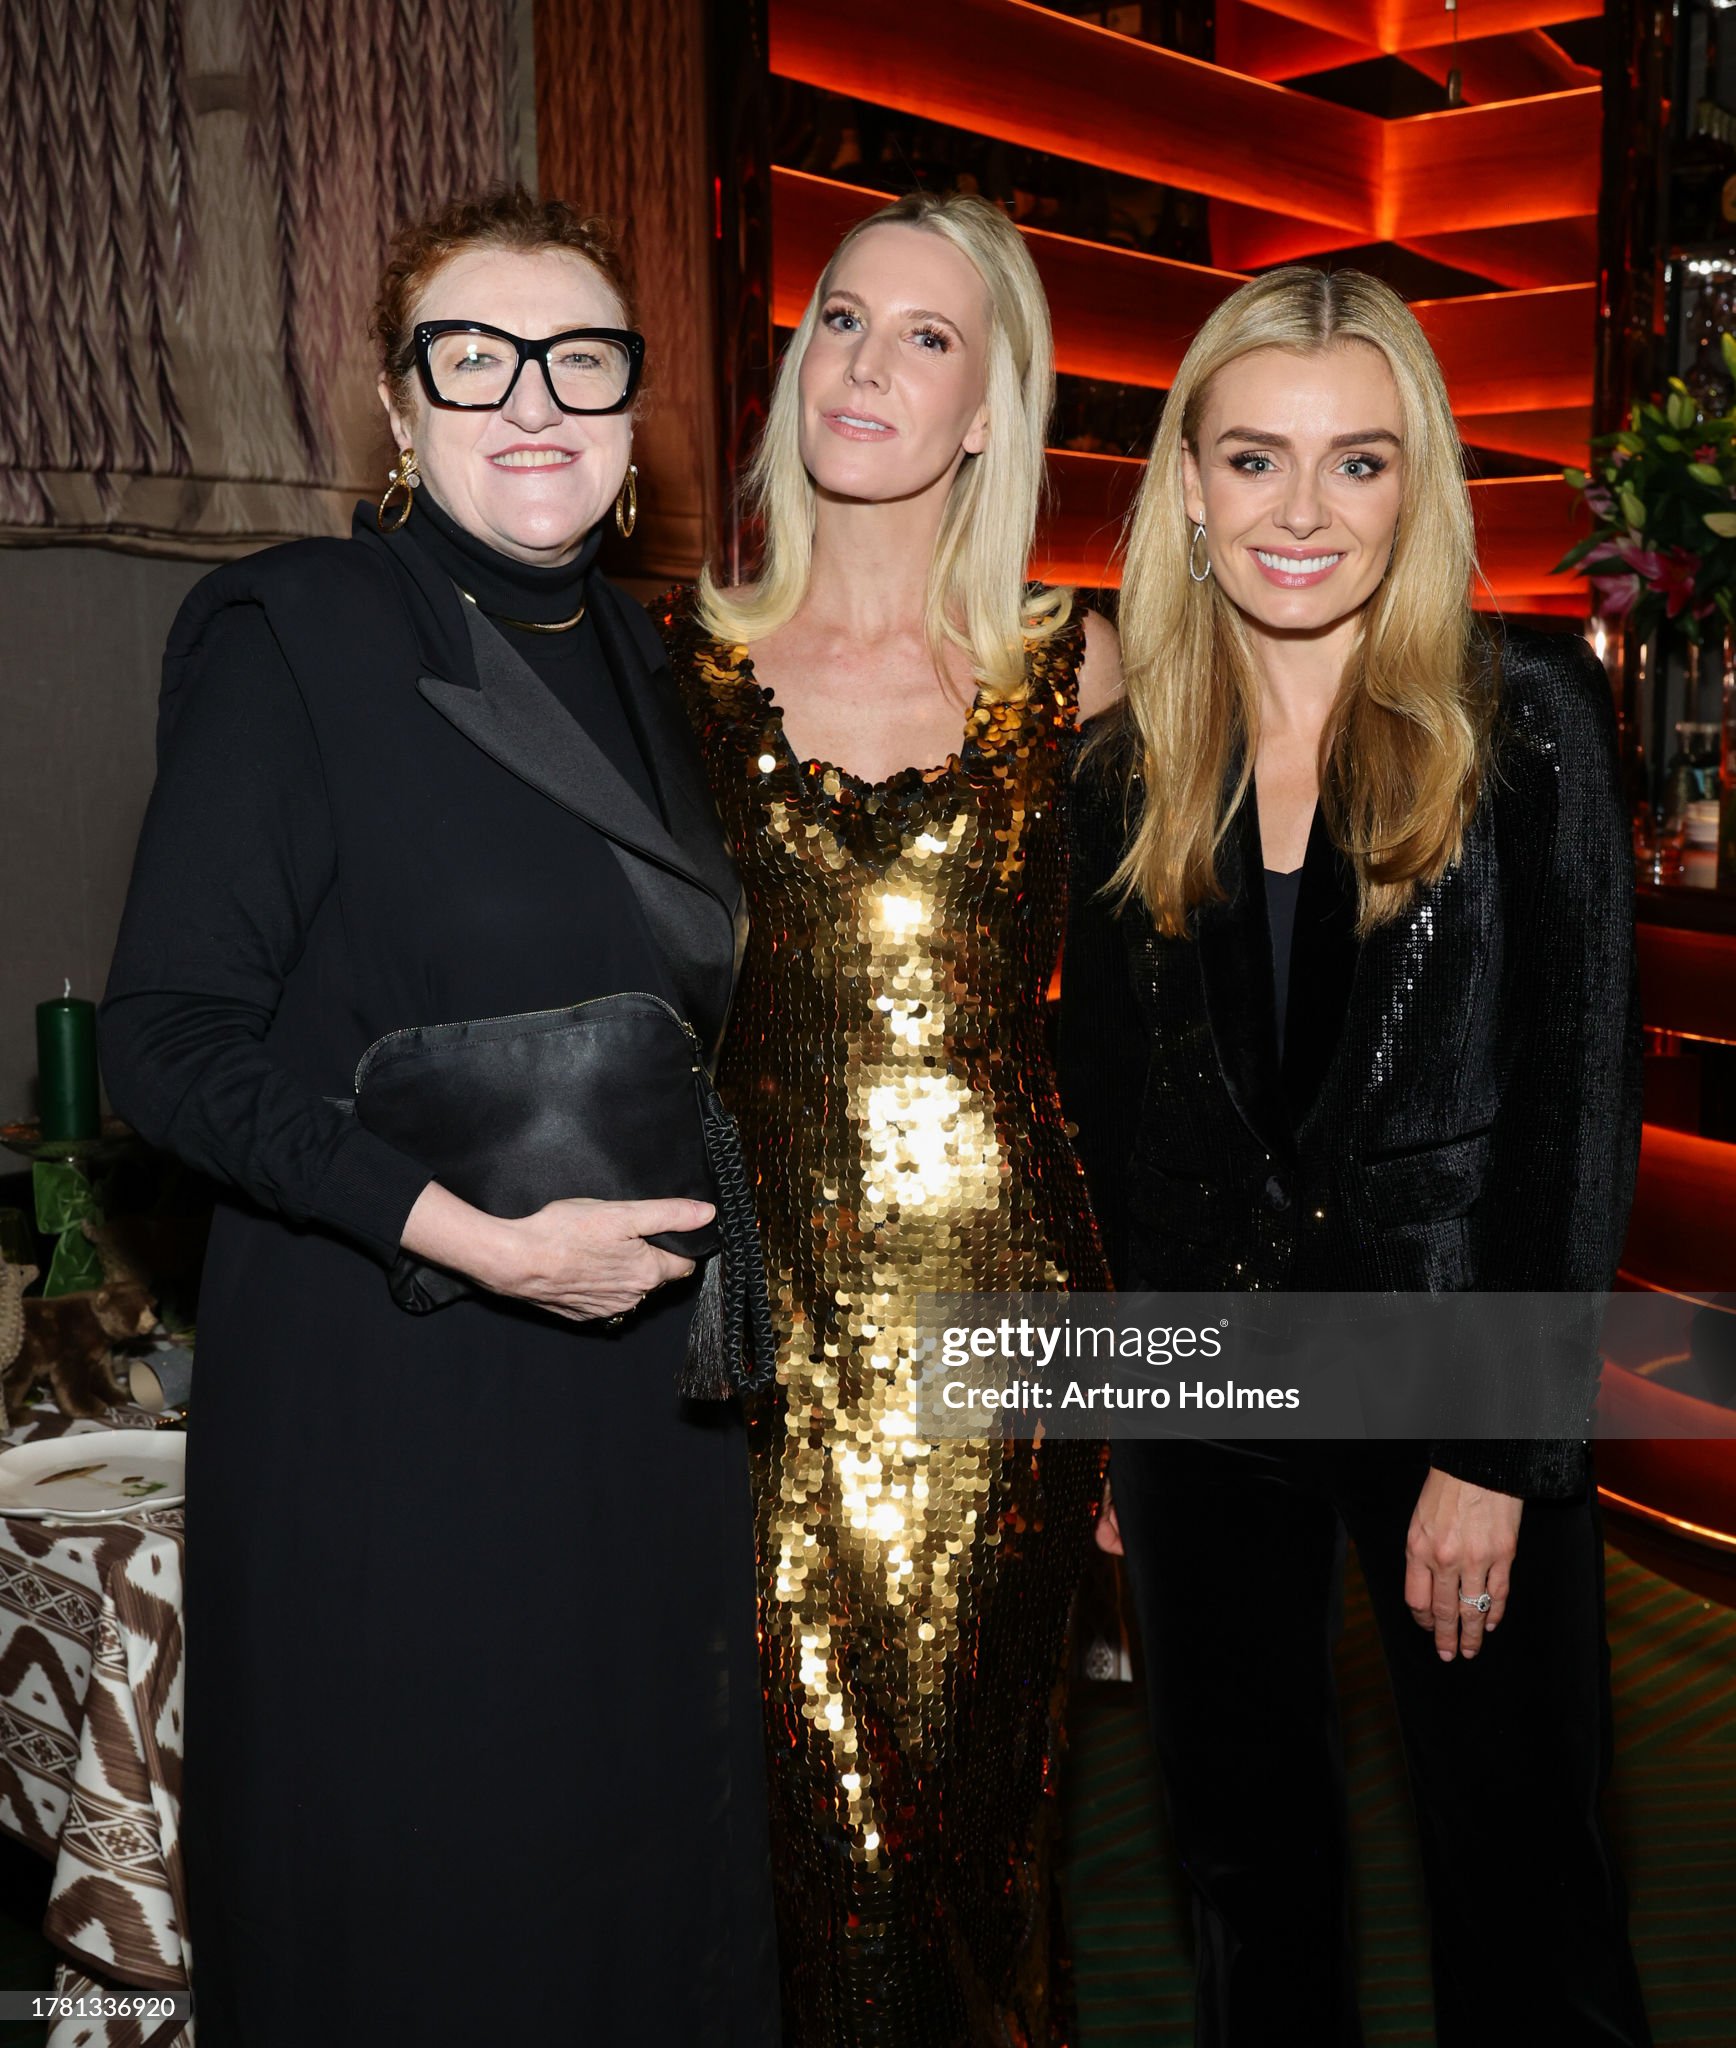 https://media.gettyimages.com/id/1781336920/photo/nina-garcia-alice-naylor-leyland-celebrate-tablescape-and-holiday-collection.jpg?s=2048x2048&w=gi&k=20&c=7DuoubtEAhYqC1dlK_BhEjdP6I4uhOgoVvV1FSoeDq4=